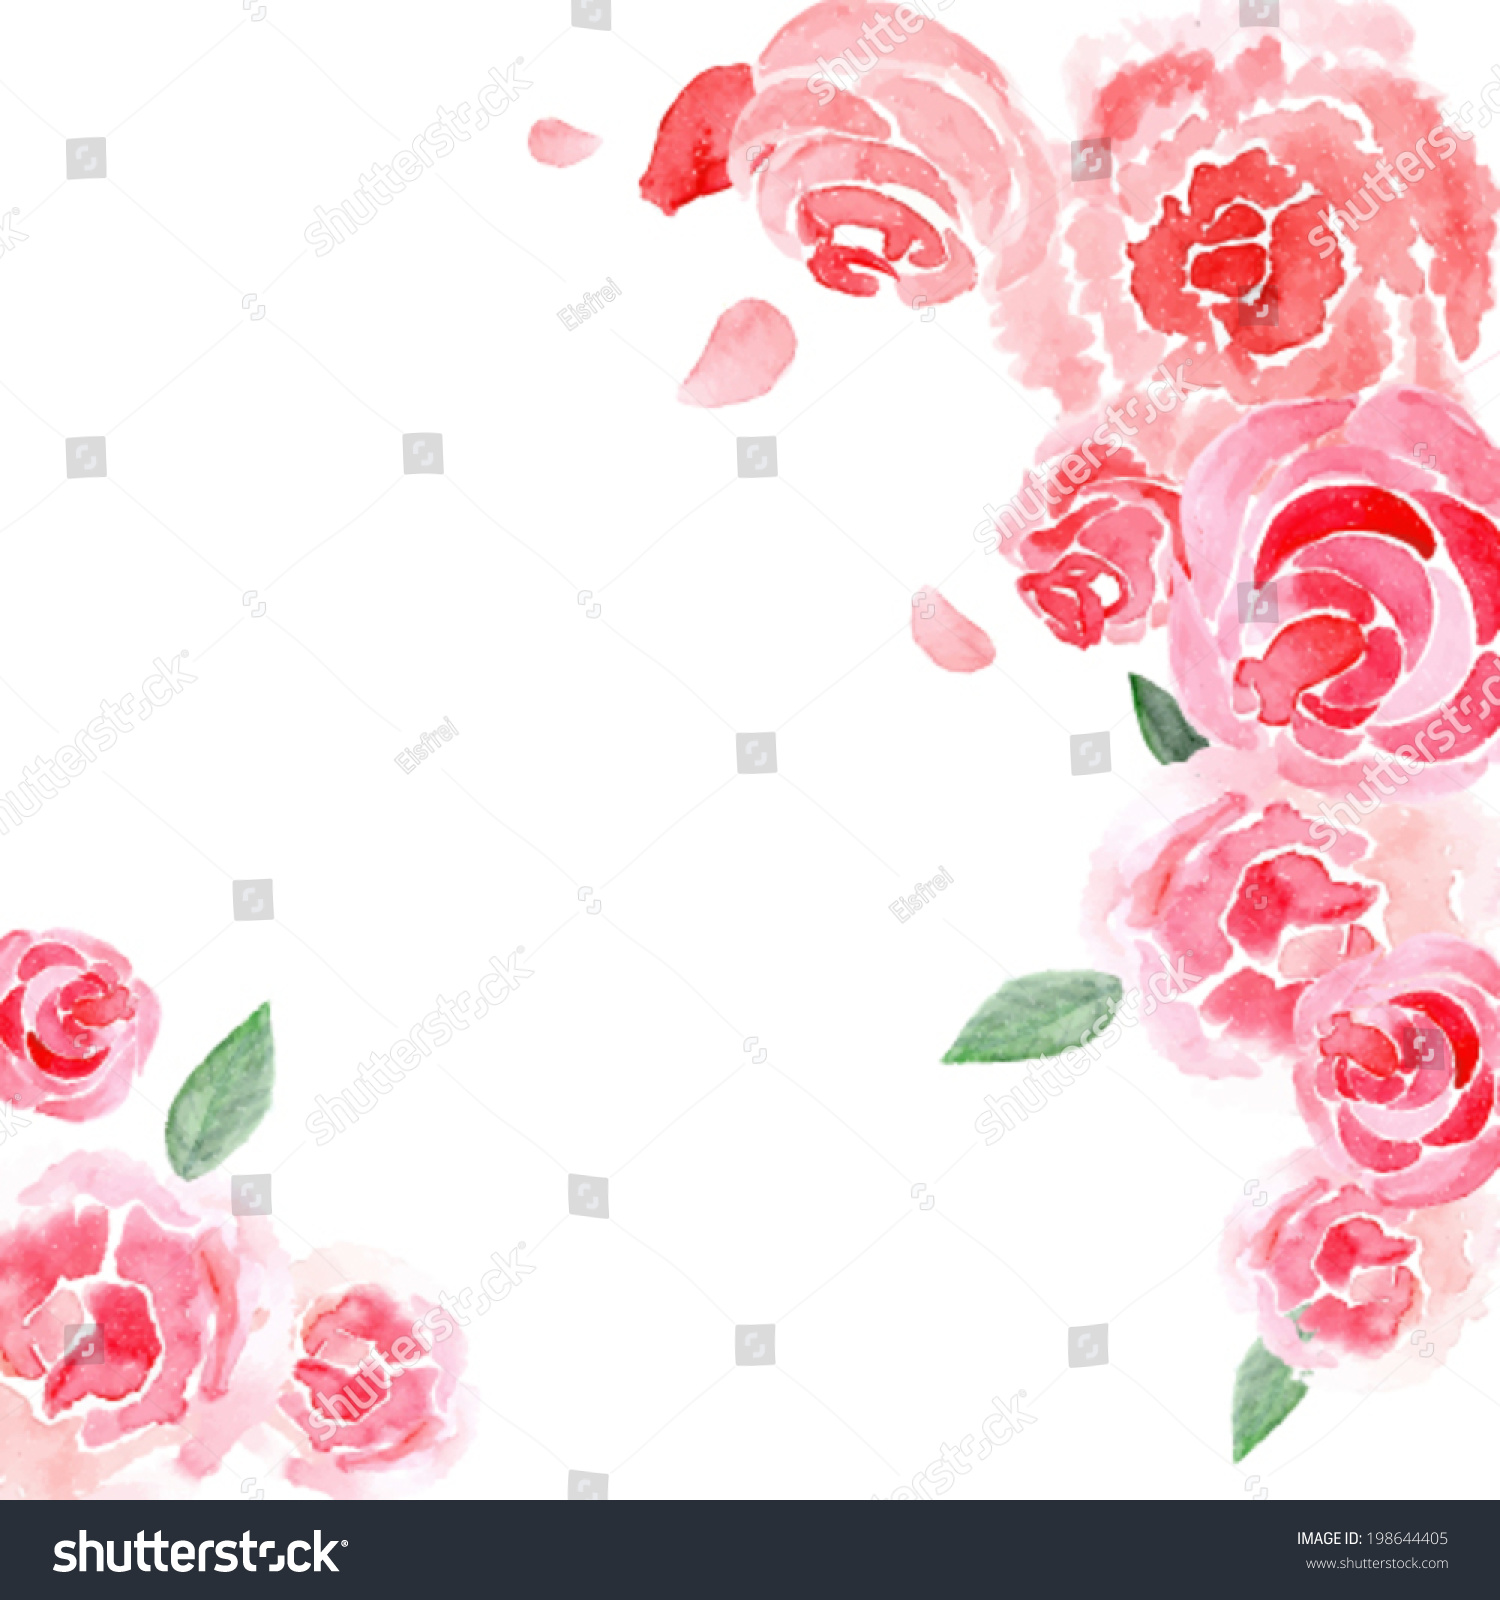 tumblr backgrounds romantic Watercolor Vector Stock 198644405 Background Roses Vector